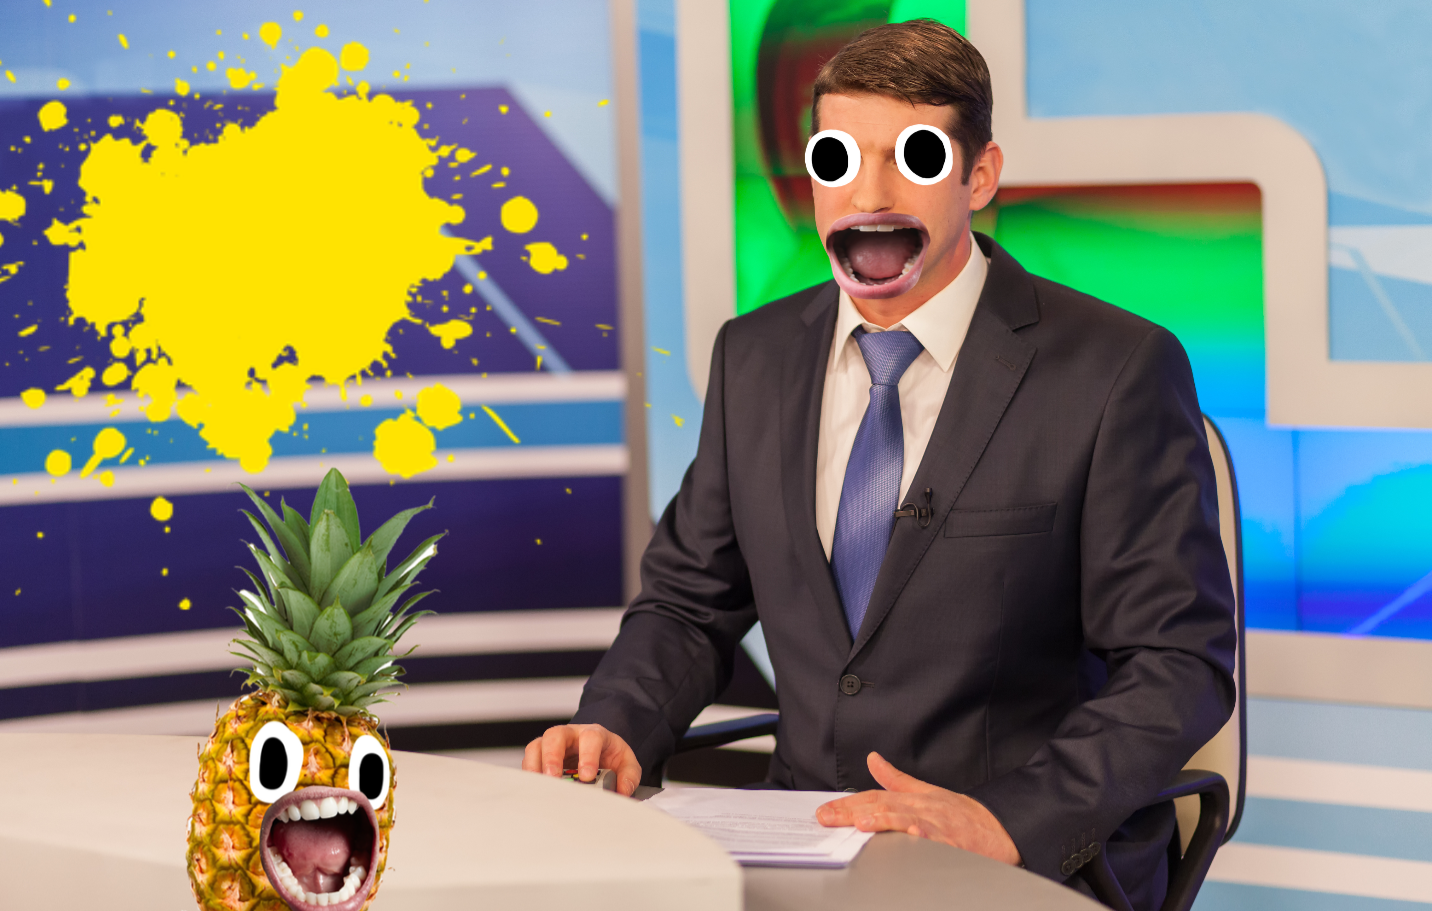 A newsreader and a shouting pineapple